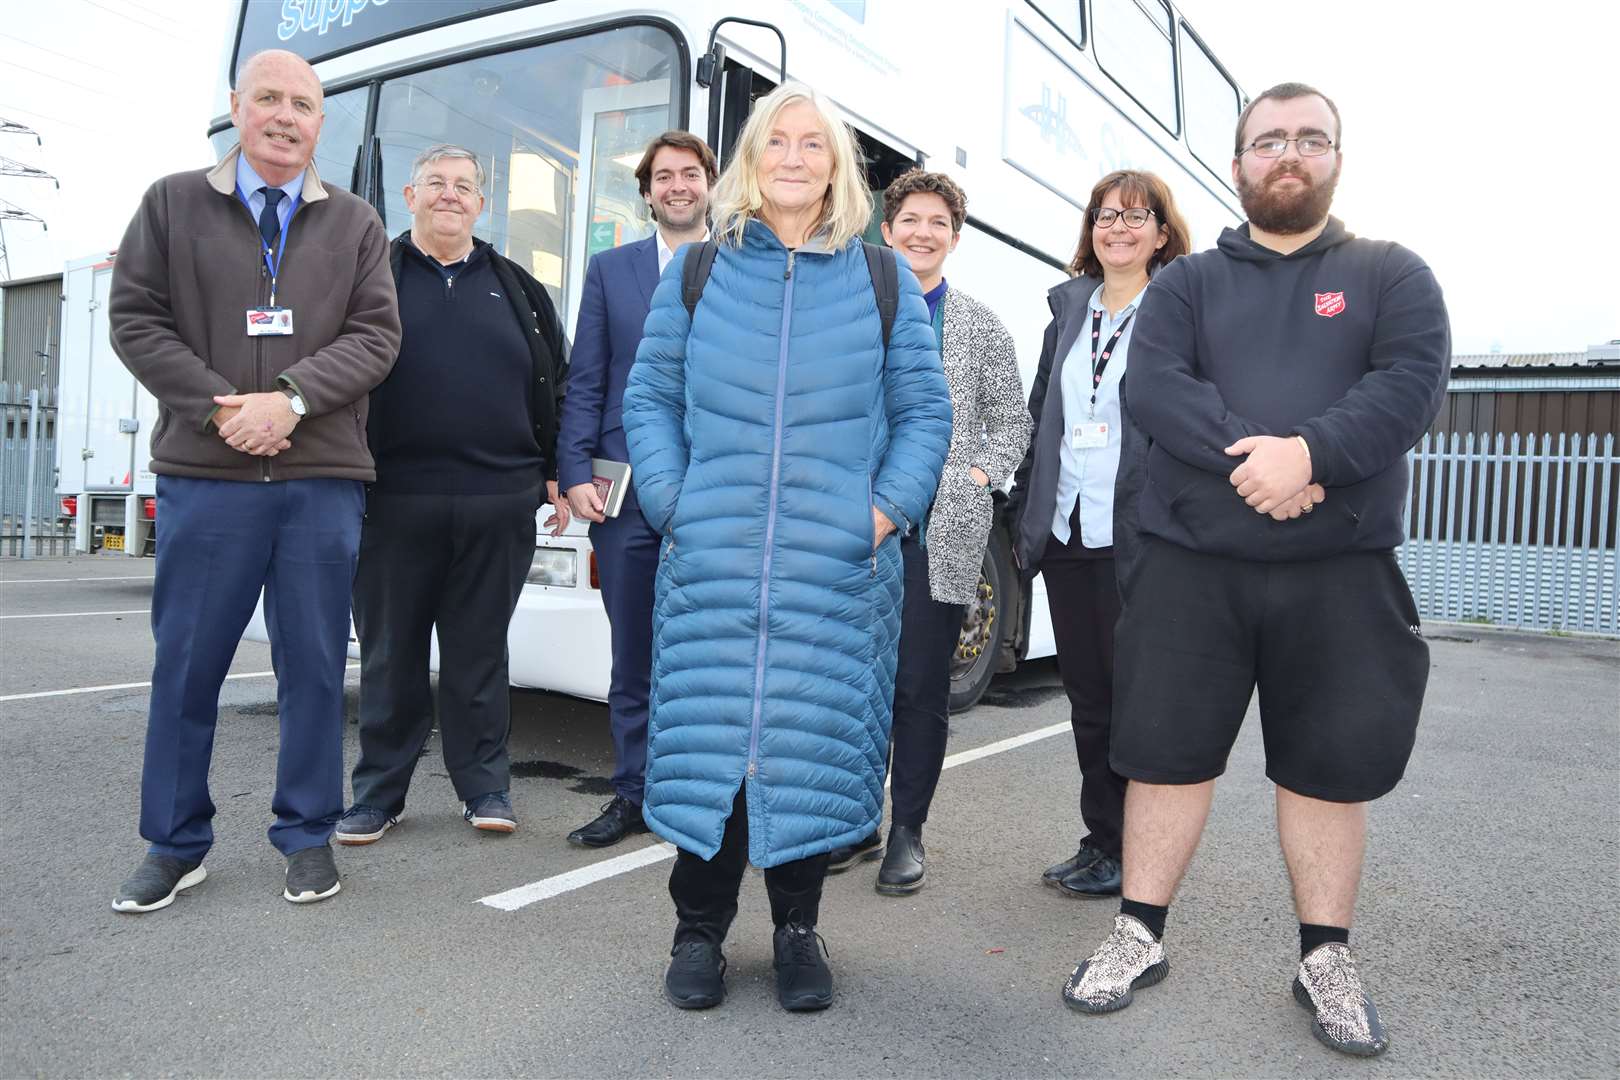 Baroness Rosie Boycott, centre, with the Feeding Britain and Sheppey Support Bus teams